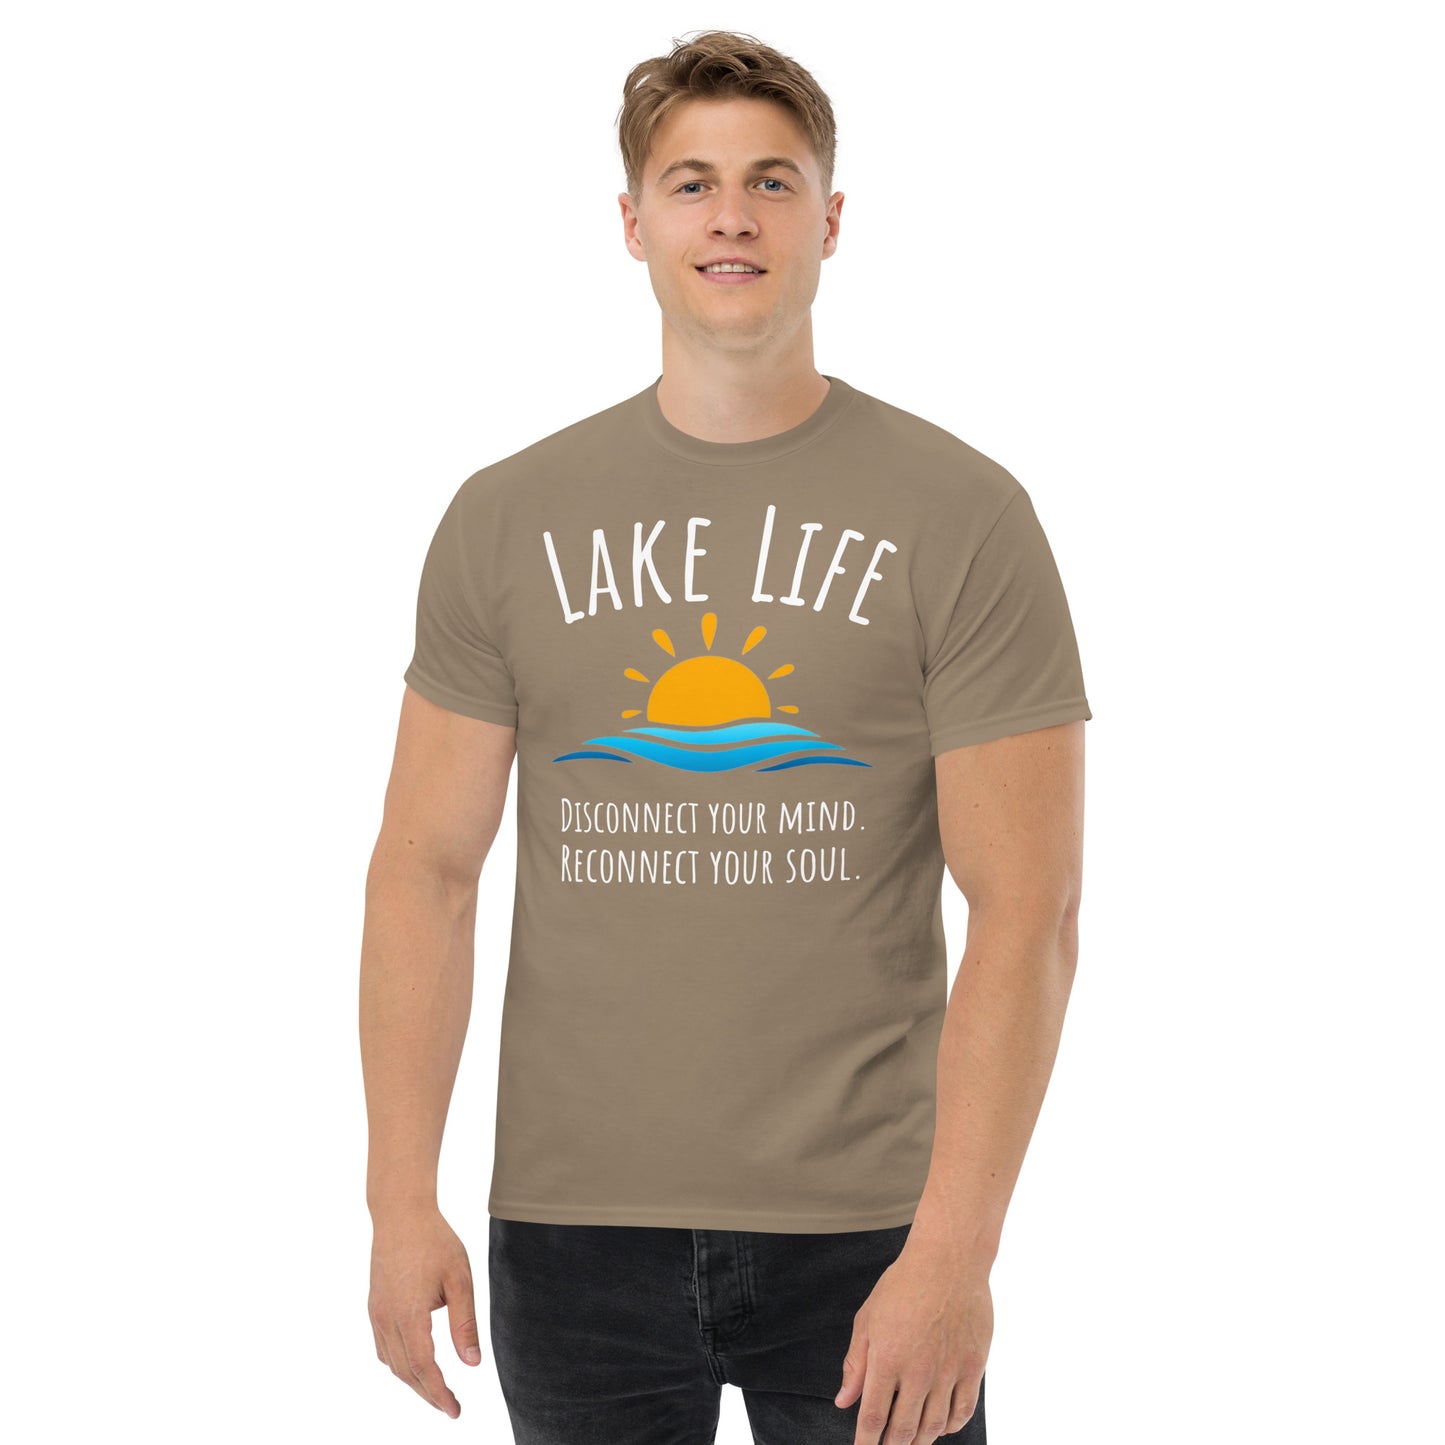 Lake Life - Disconnect your mind. Reconnect your soul Sunset classic tee